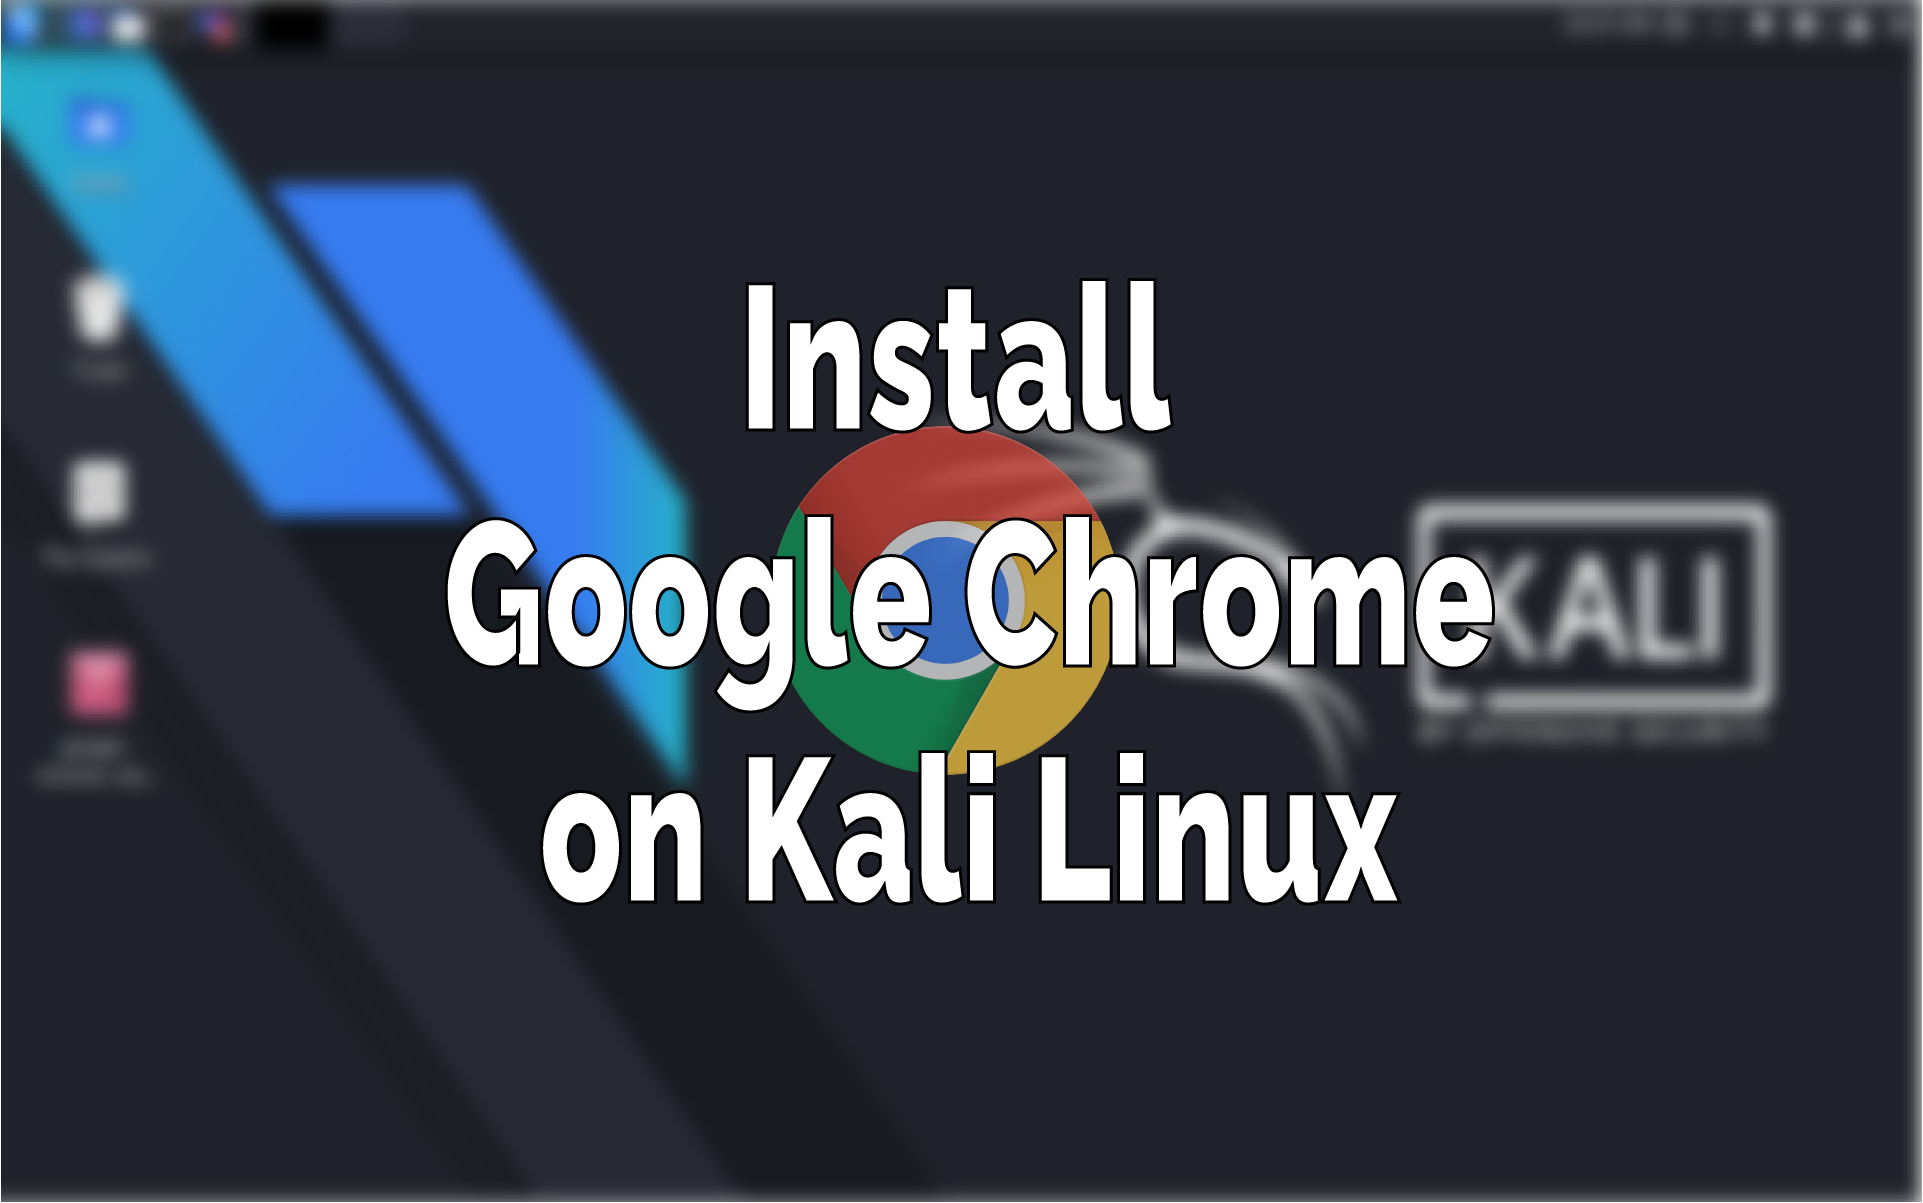 How to Install Google Chrome on Kali Linux?